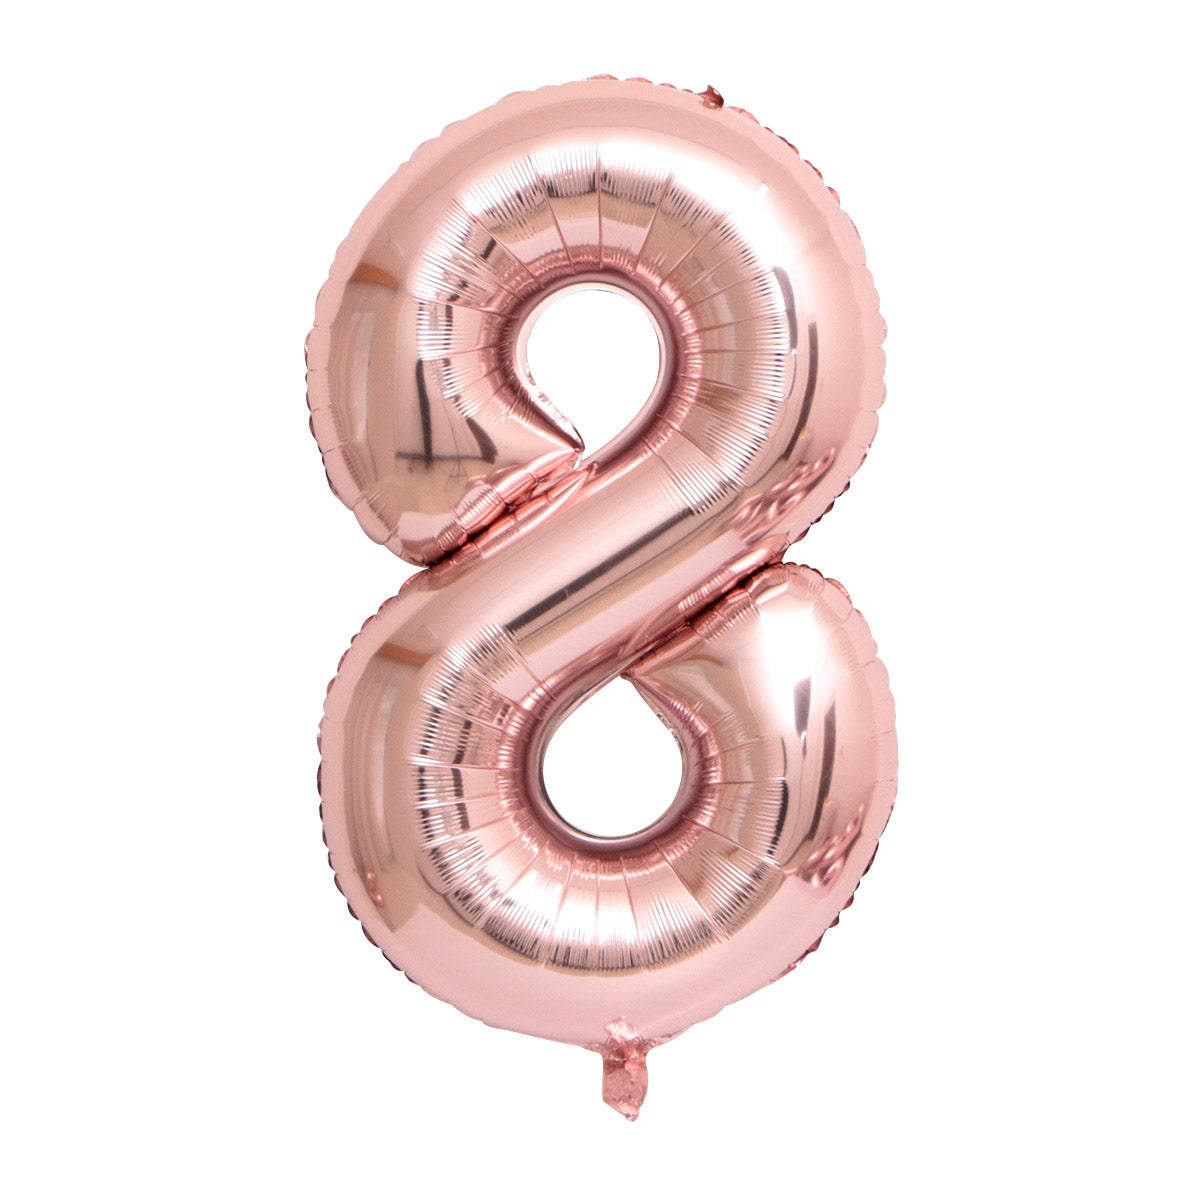 Happy 18th Birthday Balloon Banner Deluxe Party Pack - Rose Gold